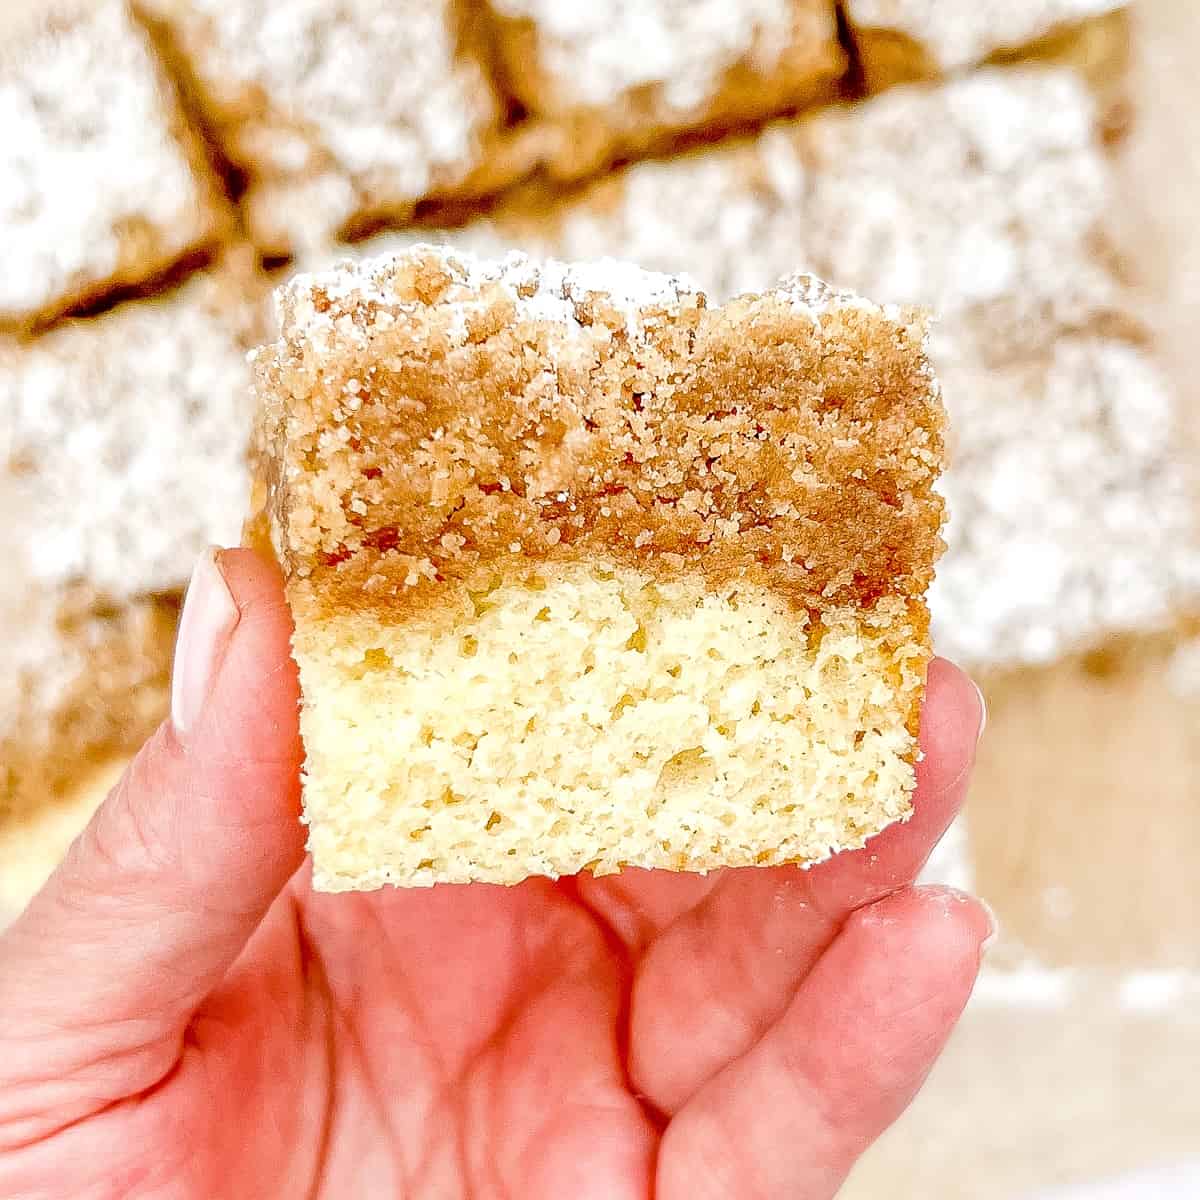 holding a piece of new jersey crumb cake with hand.